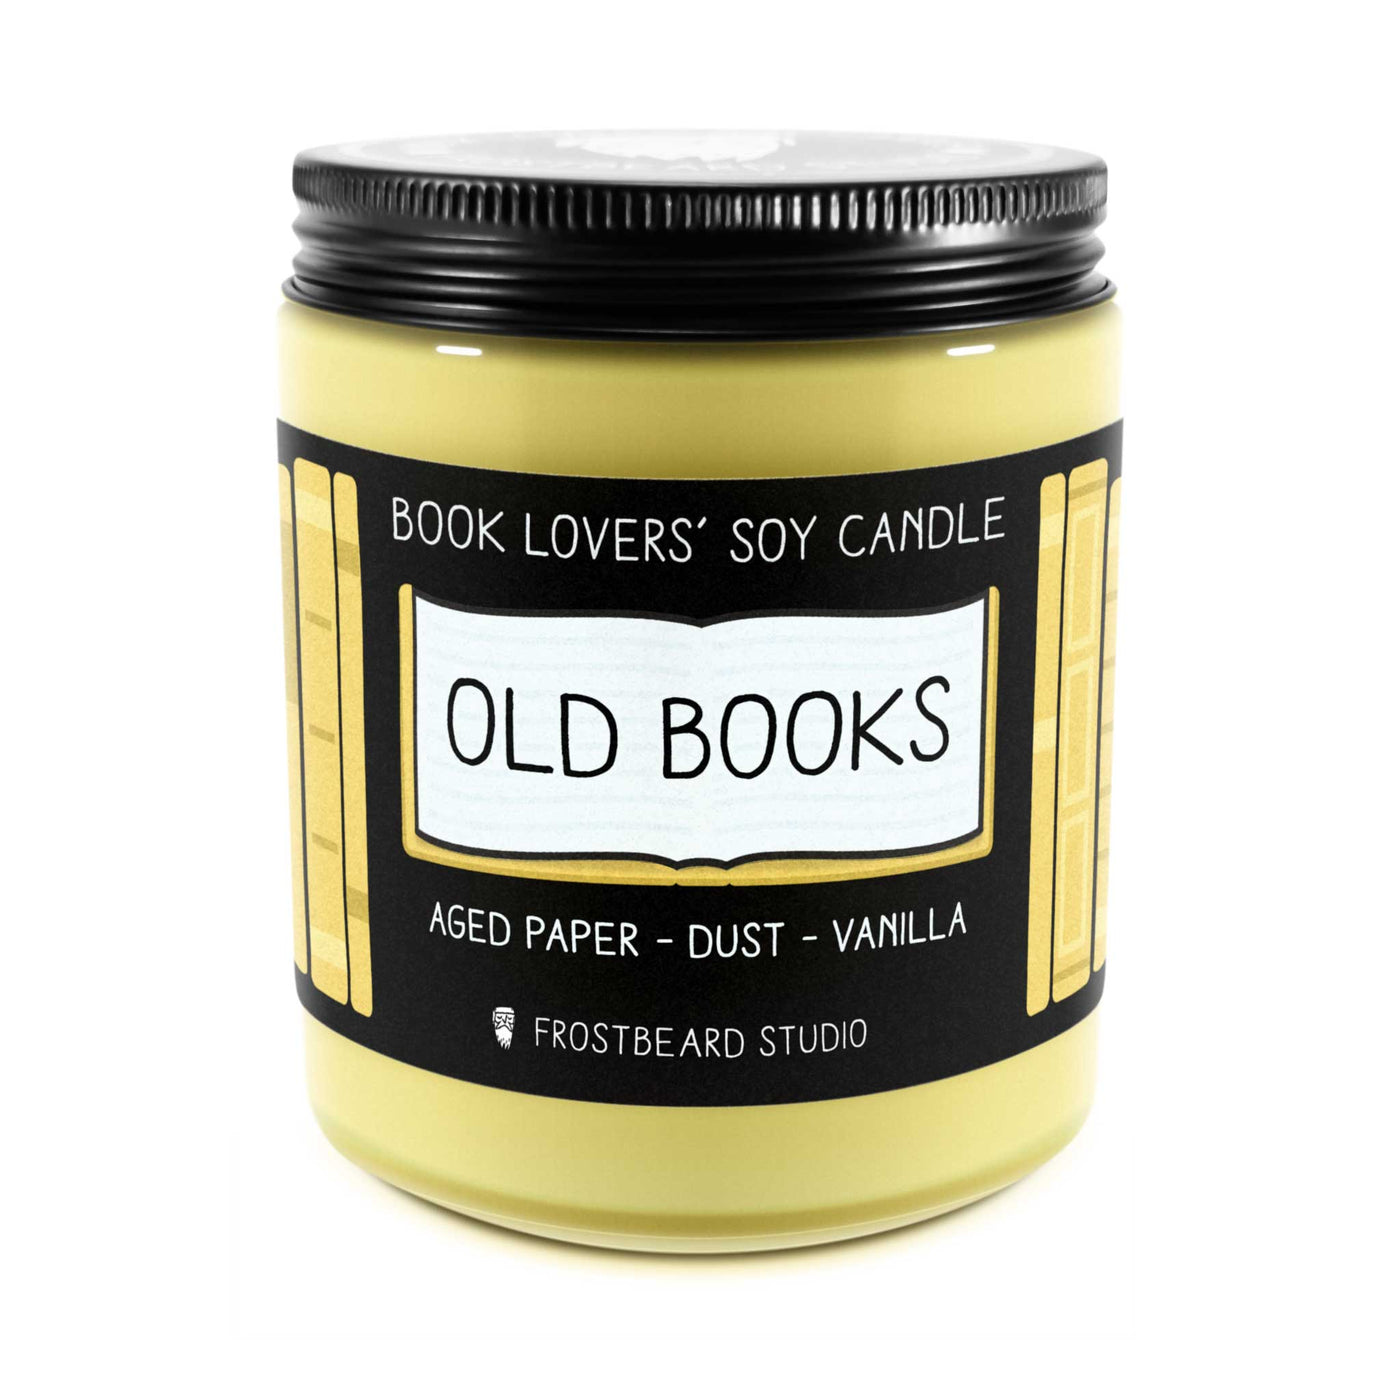 Old Books  -  8 oz Jar  -  Book Lovers' Soy Candle  -  Frostbeard Studio